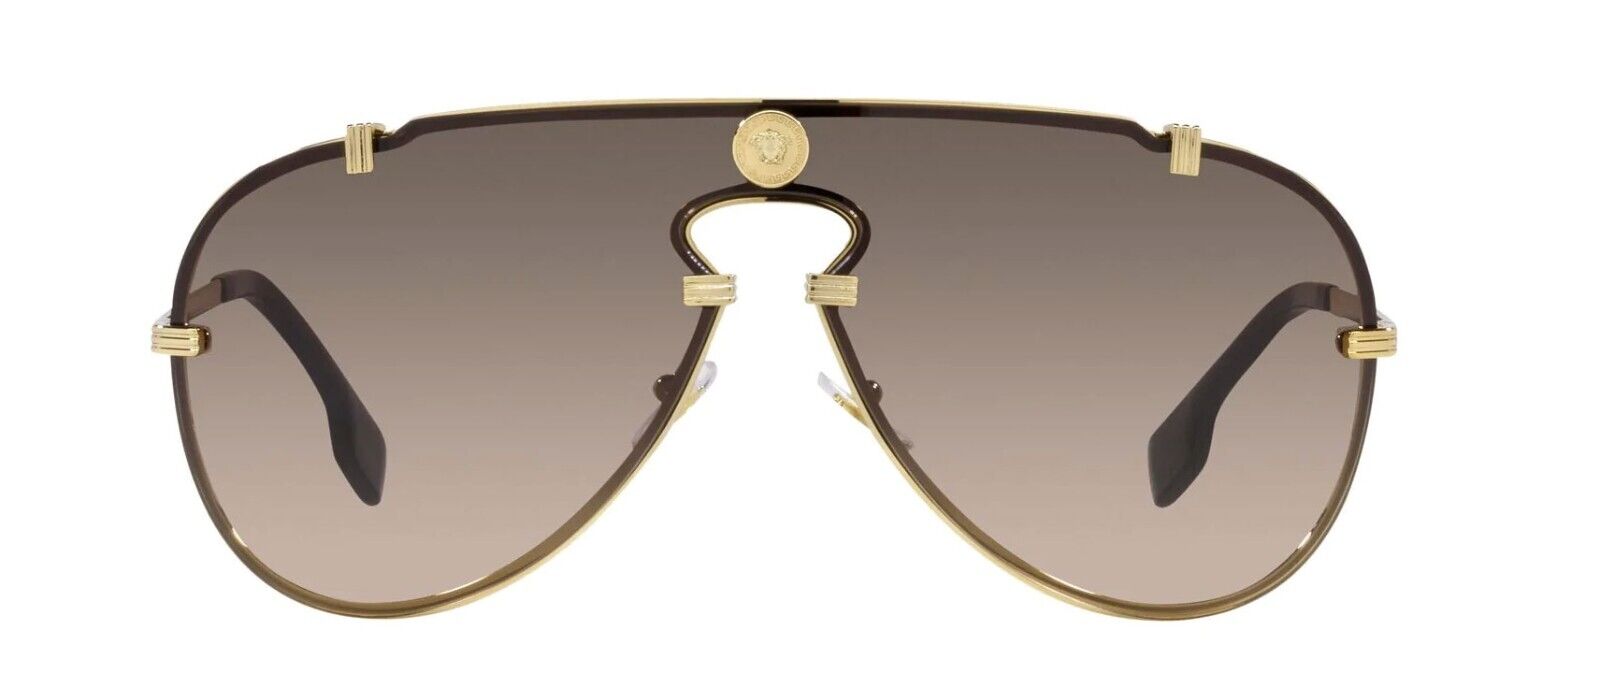 Versace Sunglasses VE 2243 1002/13 43-xx-140 Gold / Brown Gradient Made in Italy-classypw.com-1